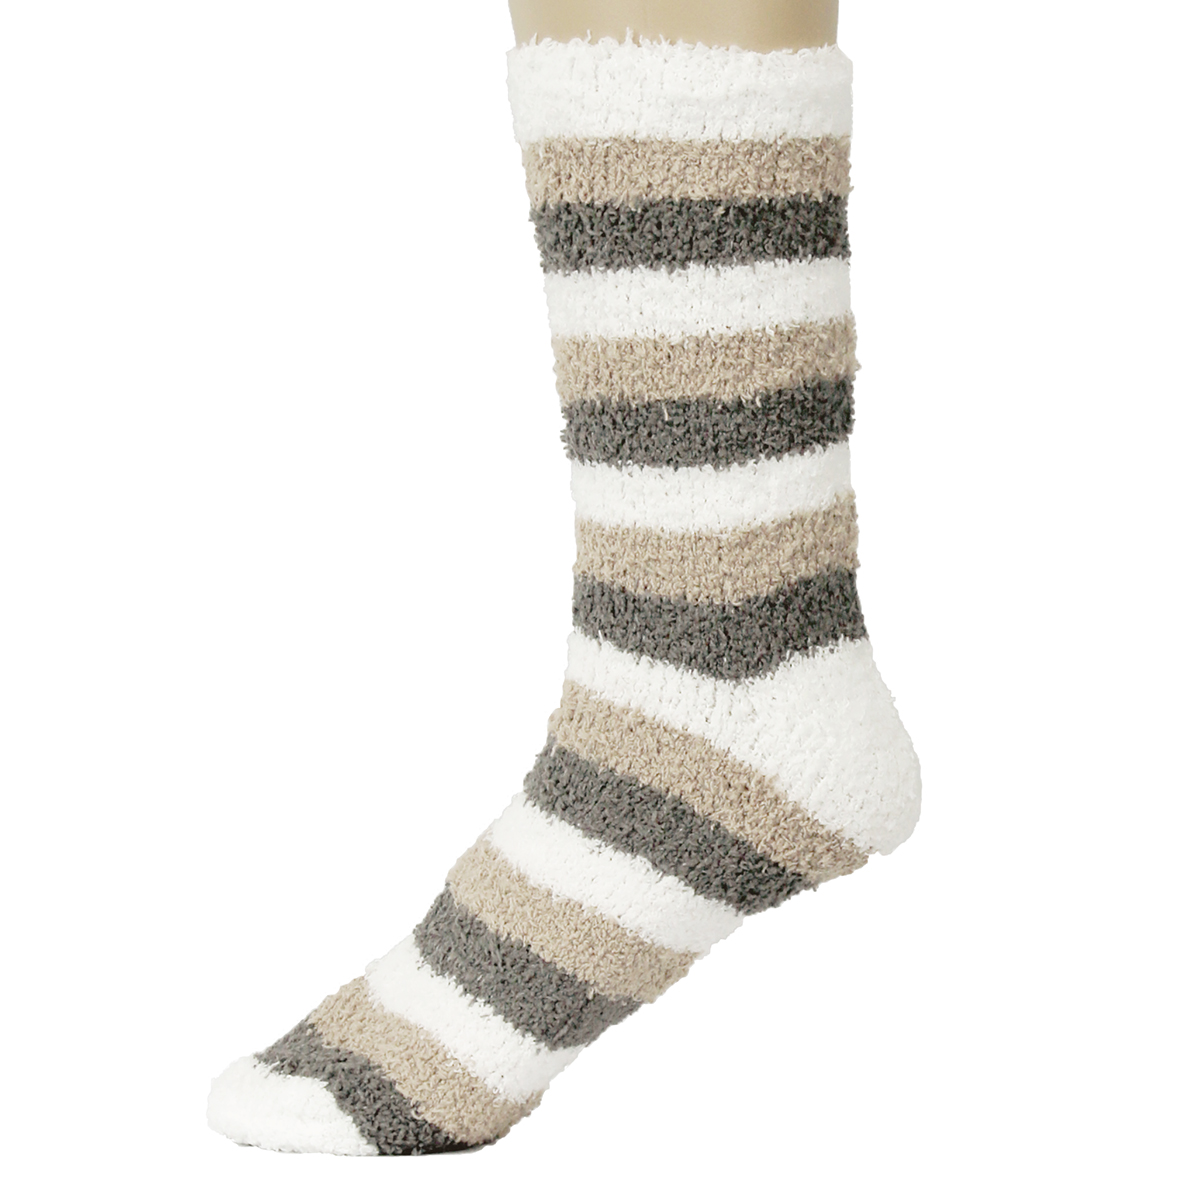 New Mens Warm Fuzzy Socks Striped Cool Fluffy Colorful Winter ...